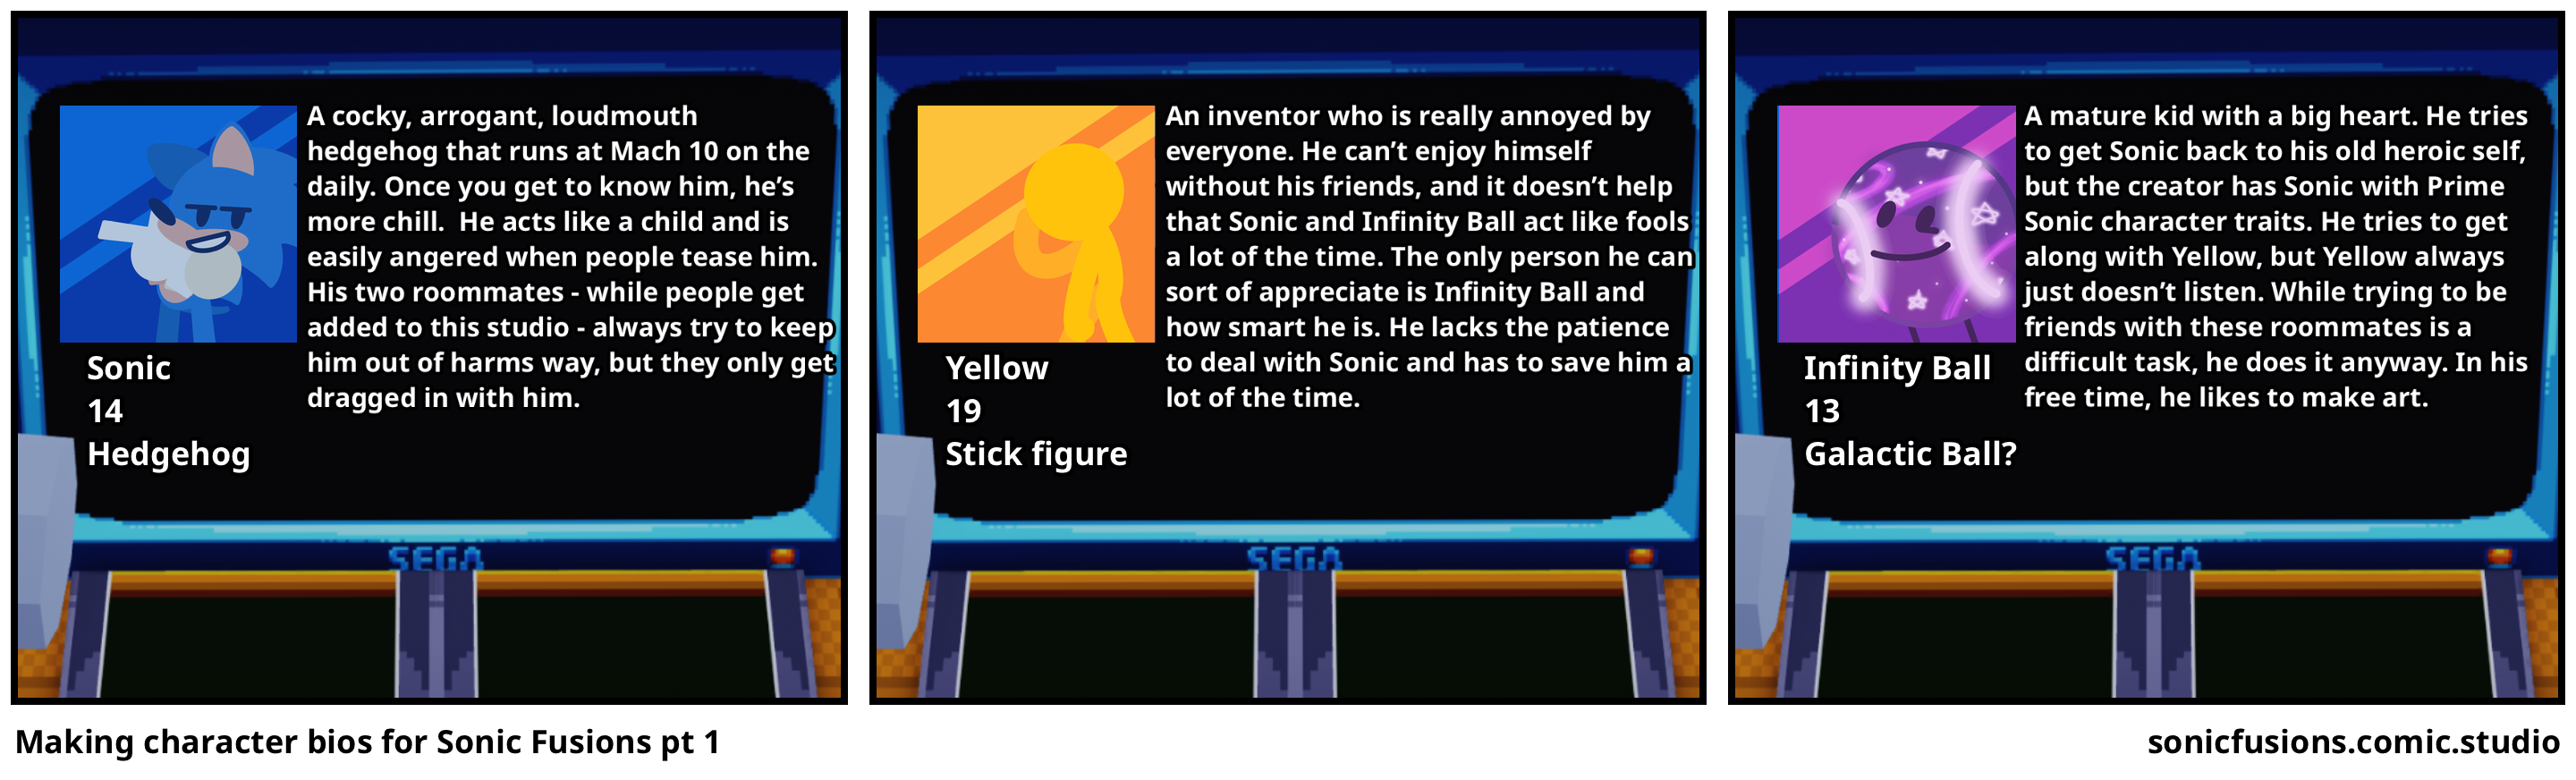 Making character bios for Sonic Fusions pt 1